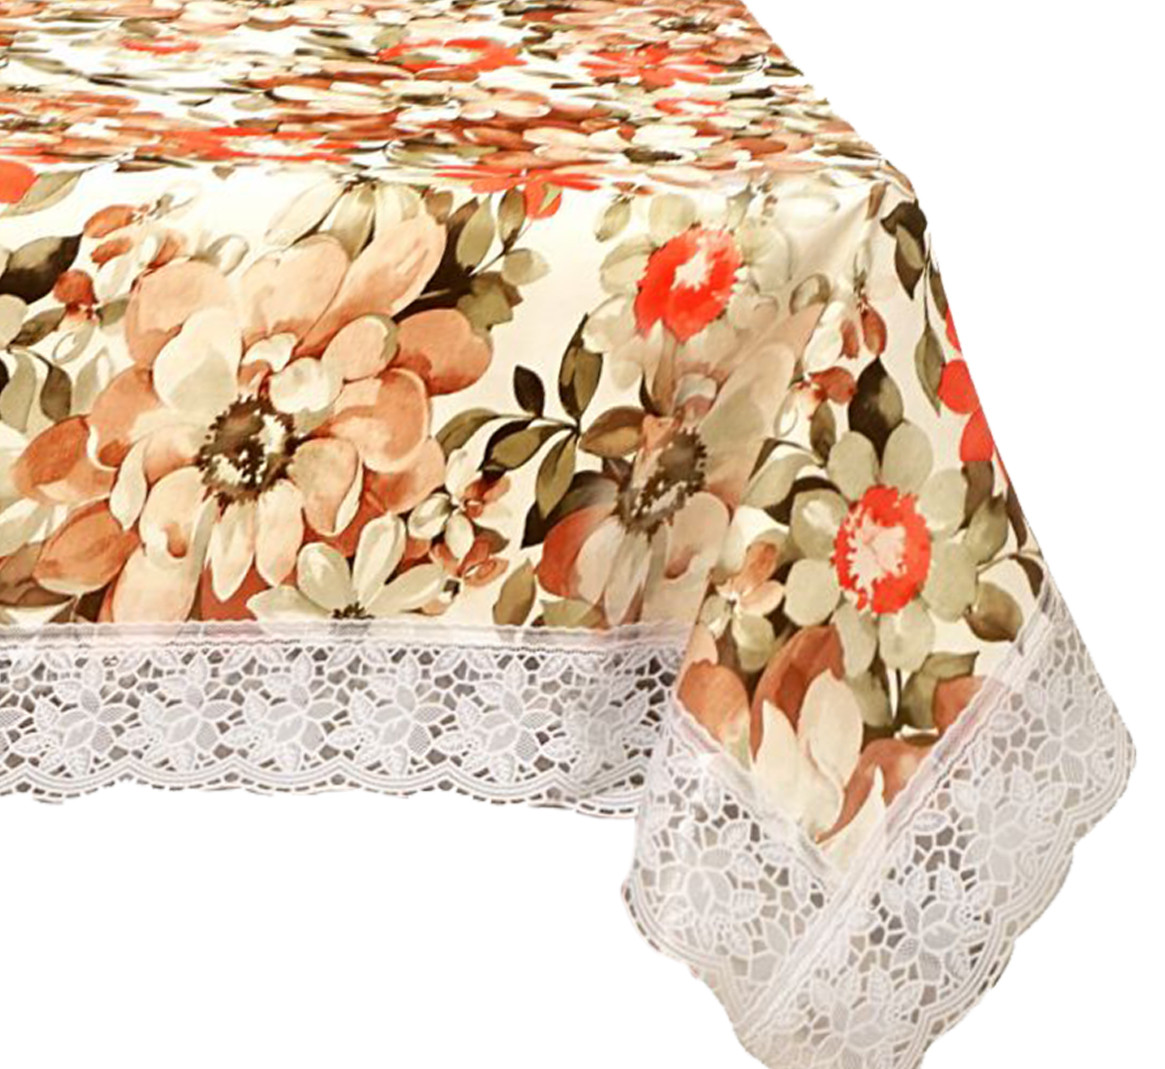 Kuber Industries Dining Table Cover Tablecloth Waterproof Protector 6 Seater With Flower Printed, 60 X 90 Inches Rectangle (Cream)